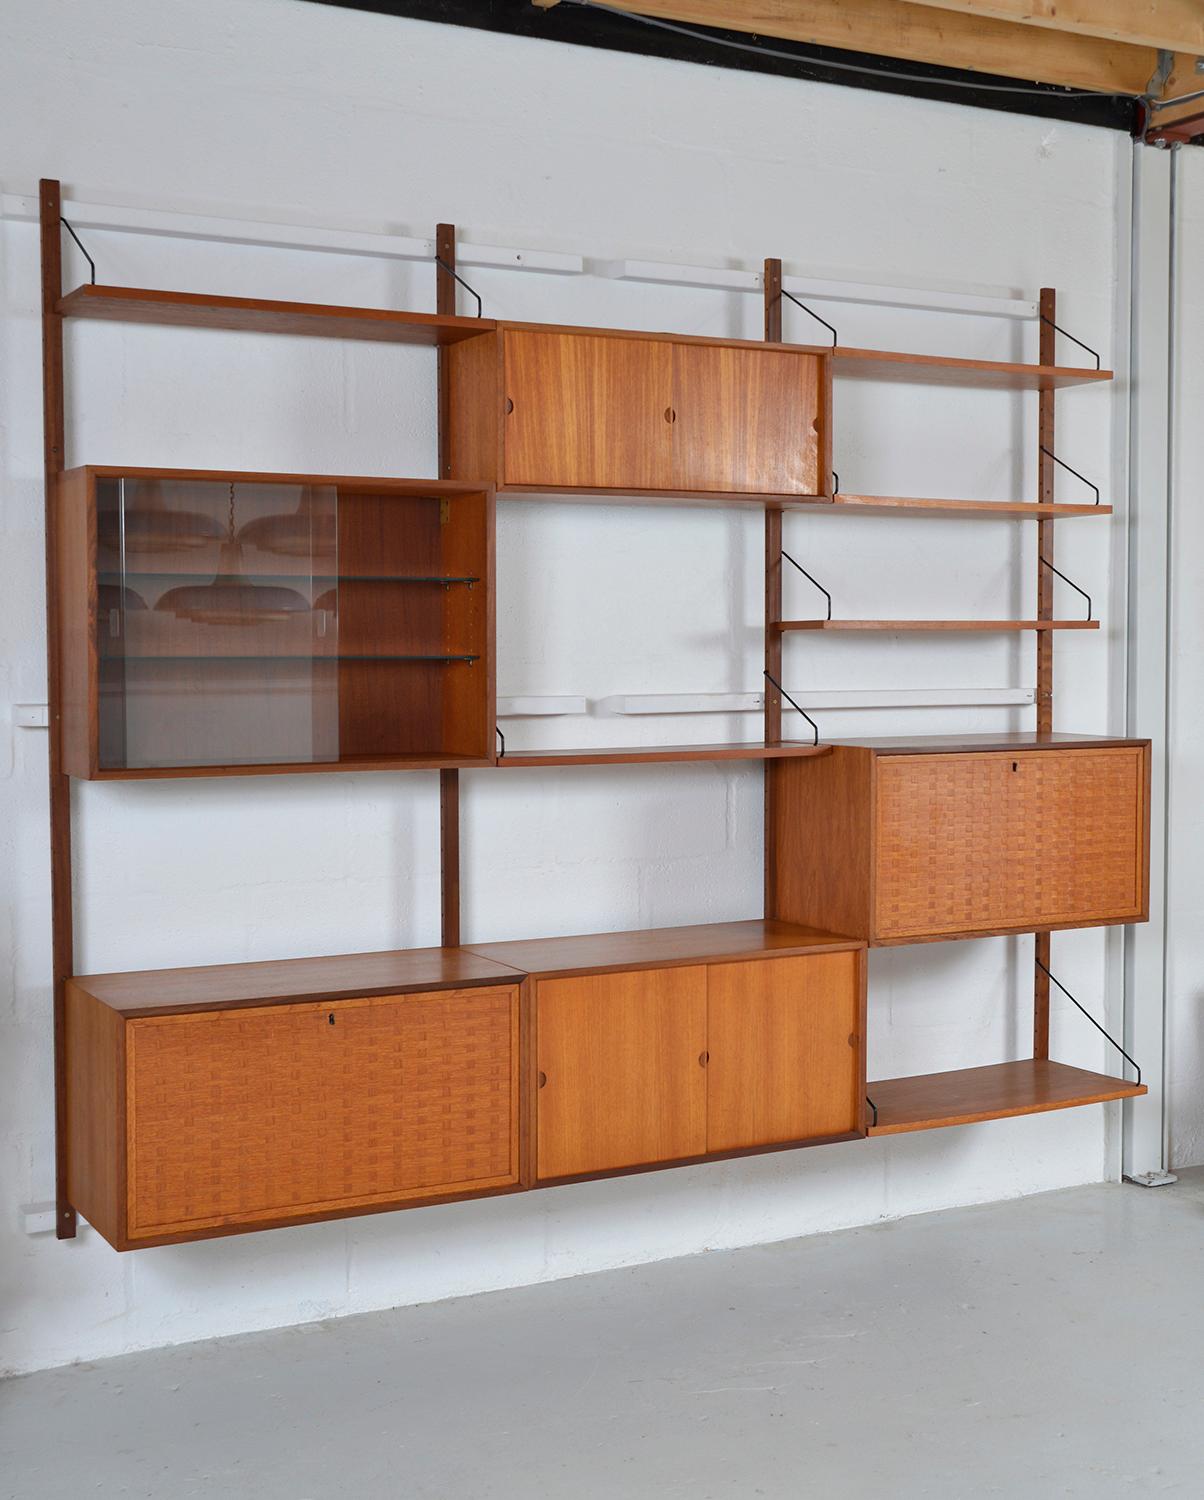 This highly versatile and functional “Royal System” was originally designed by Poul Cadovius in 1948. This three-bay teak shelving system offers a wide variety of storage and display options. 
The two attractive basket weave drop front cabinets are